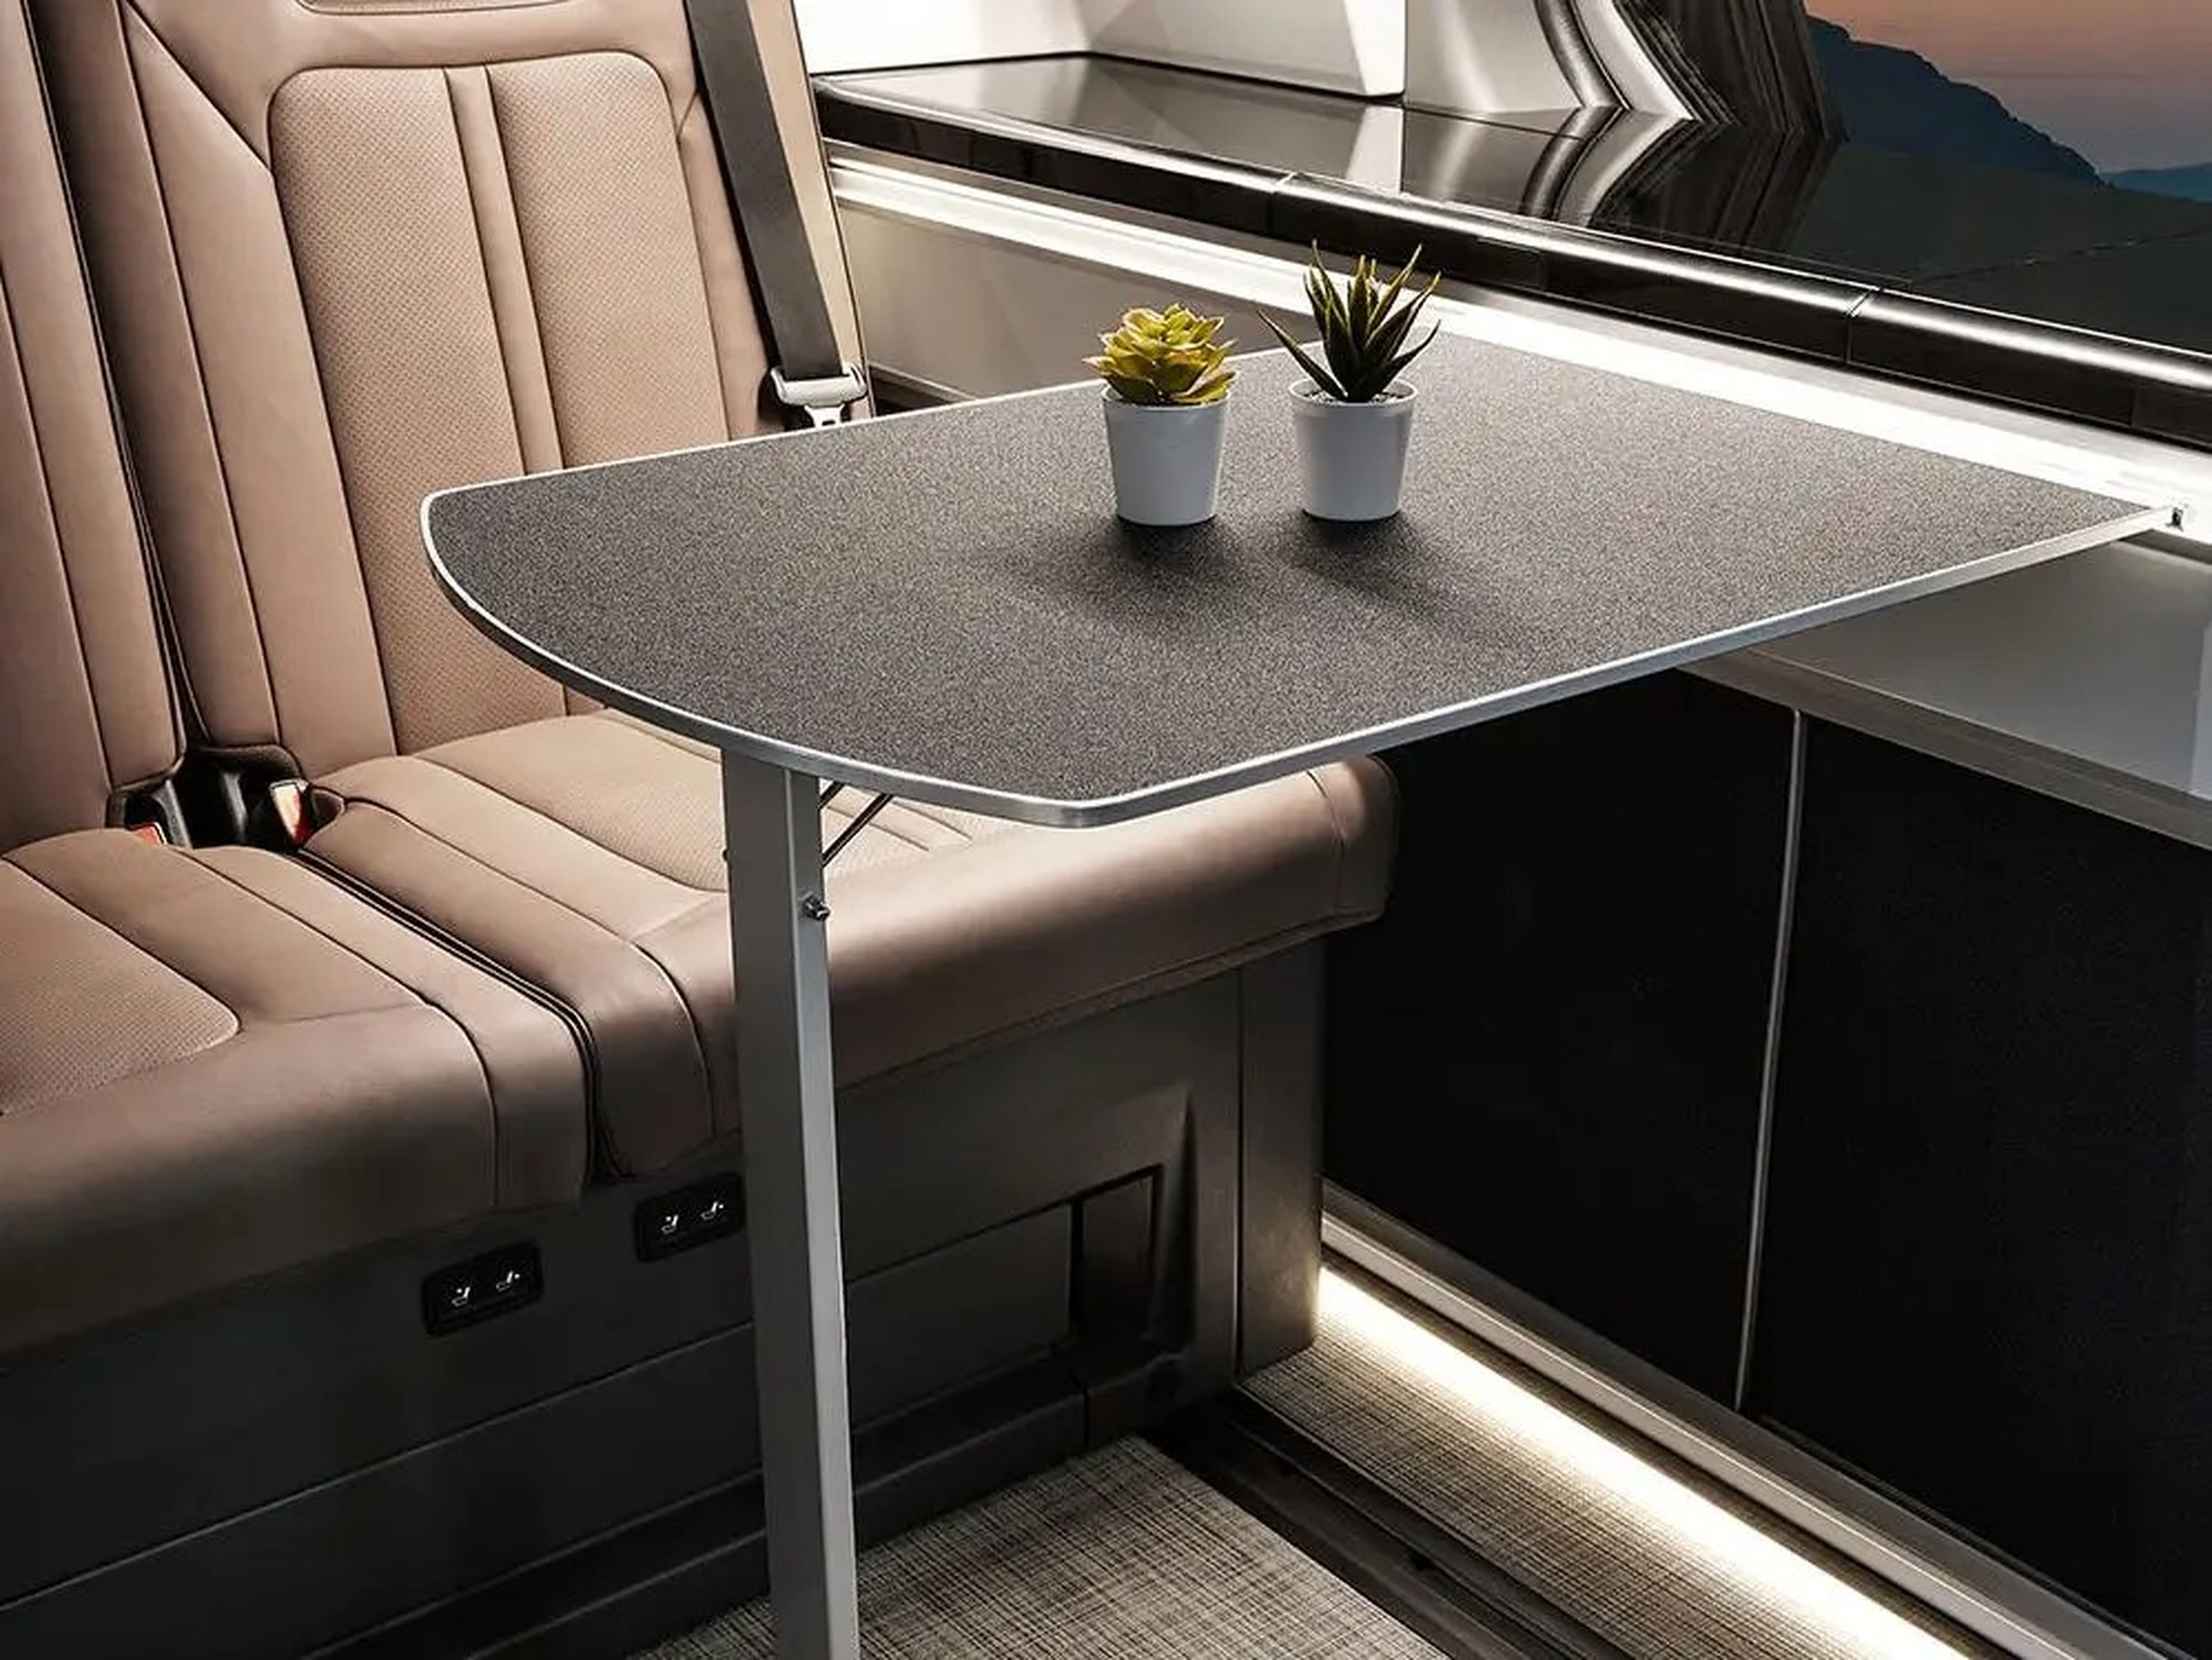 The Hyundai Staria Lounge Camper's interior table next to brown seats.